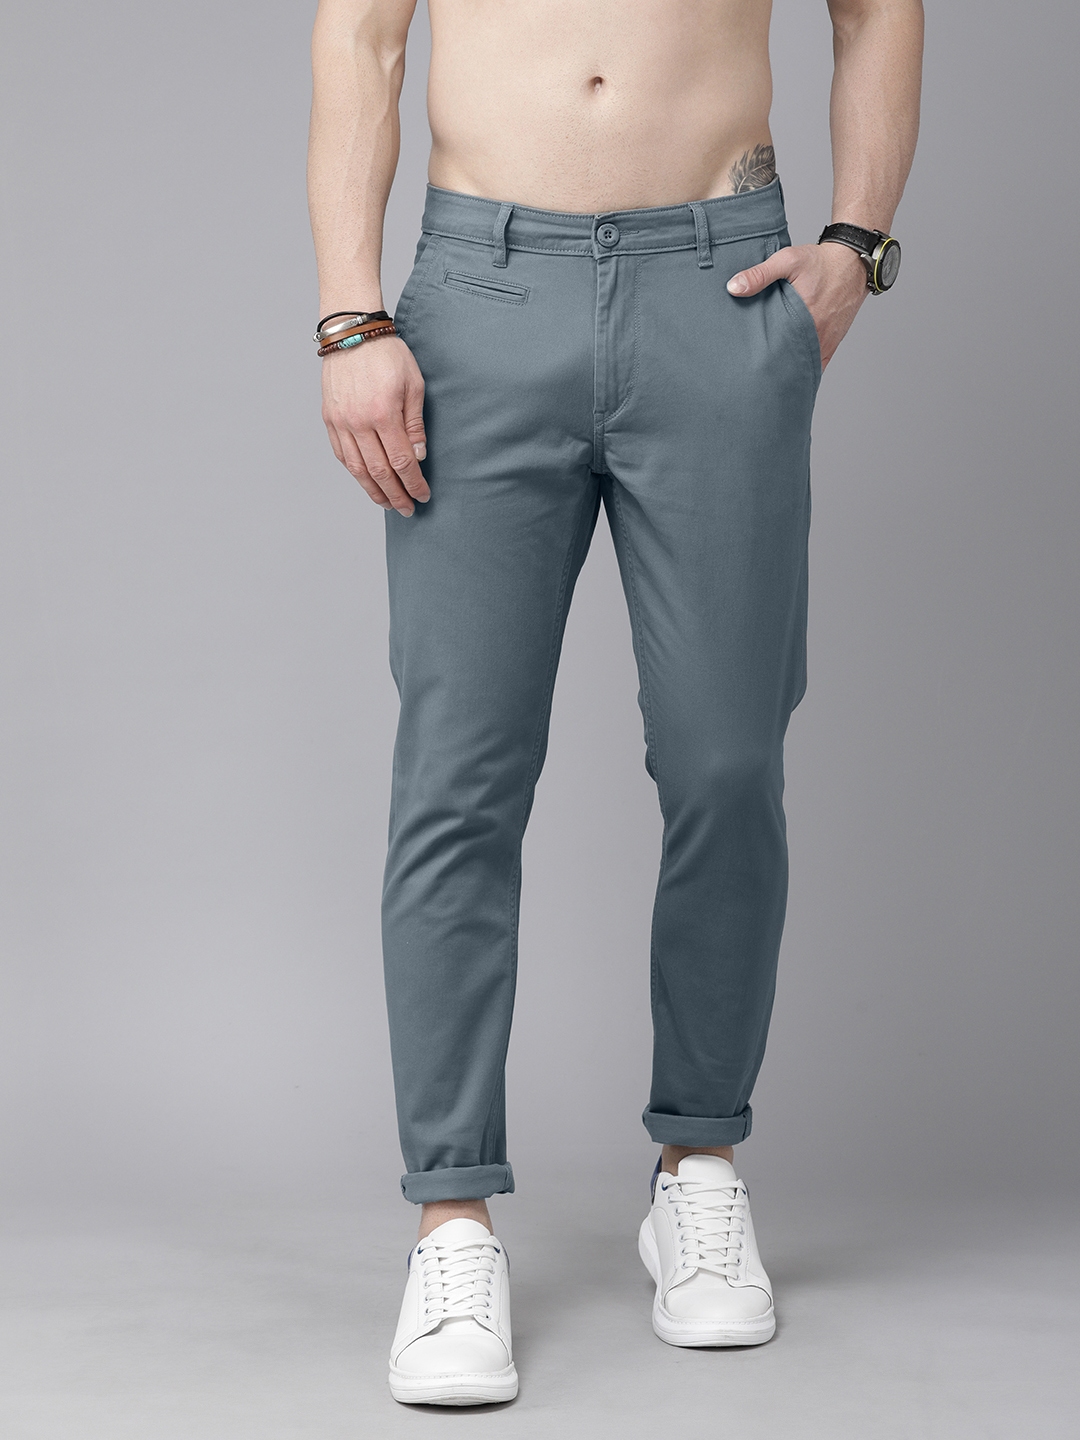 Buy The Roadster Lifestyle Co Men Grey Chinos Trousers - Trousers for ...